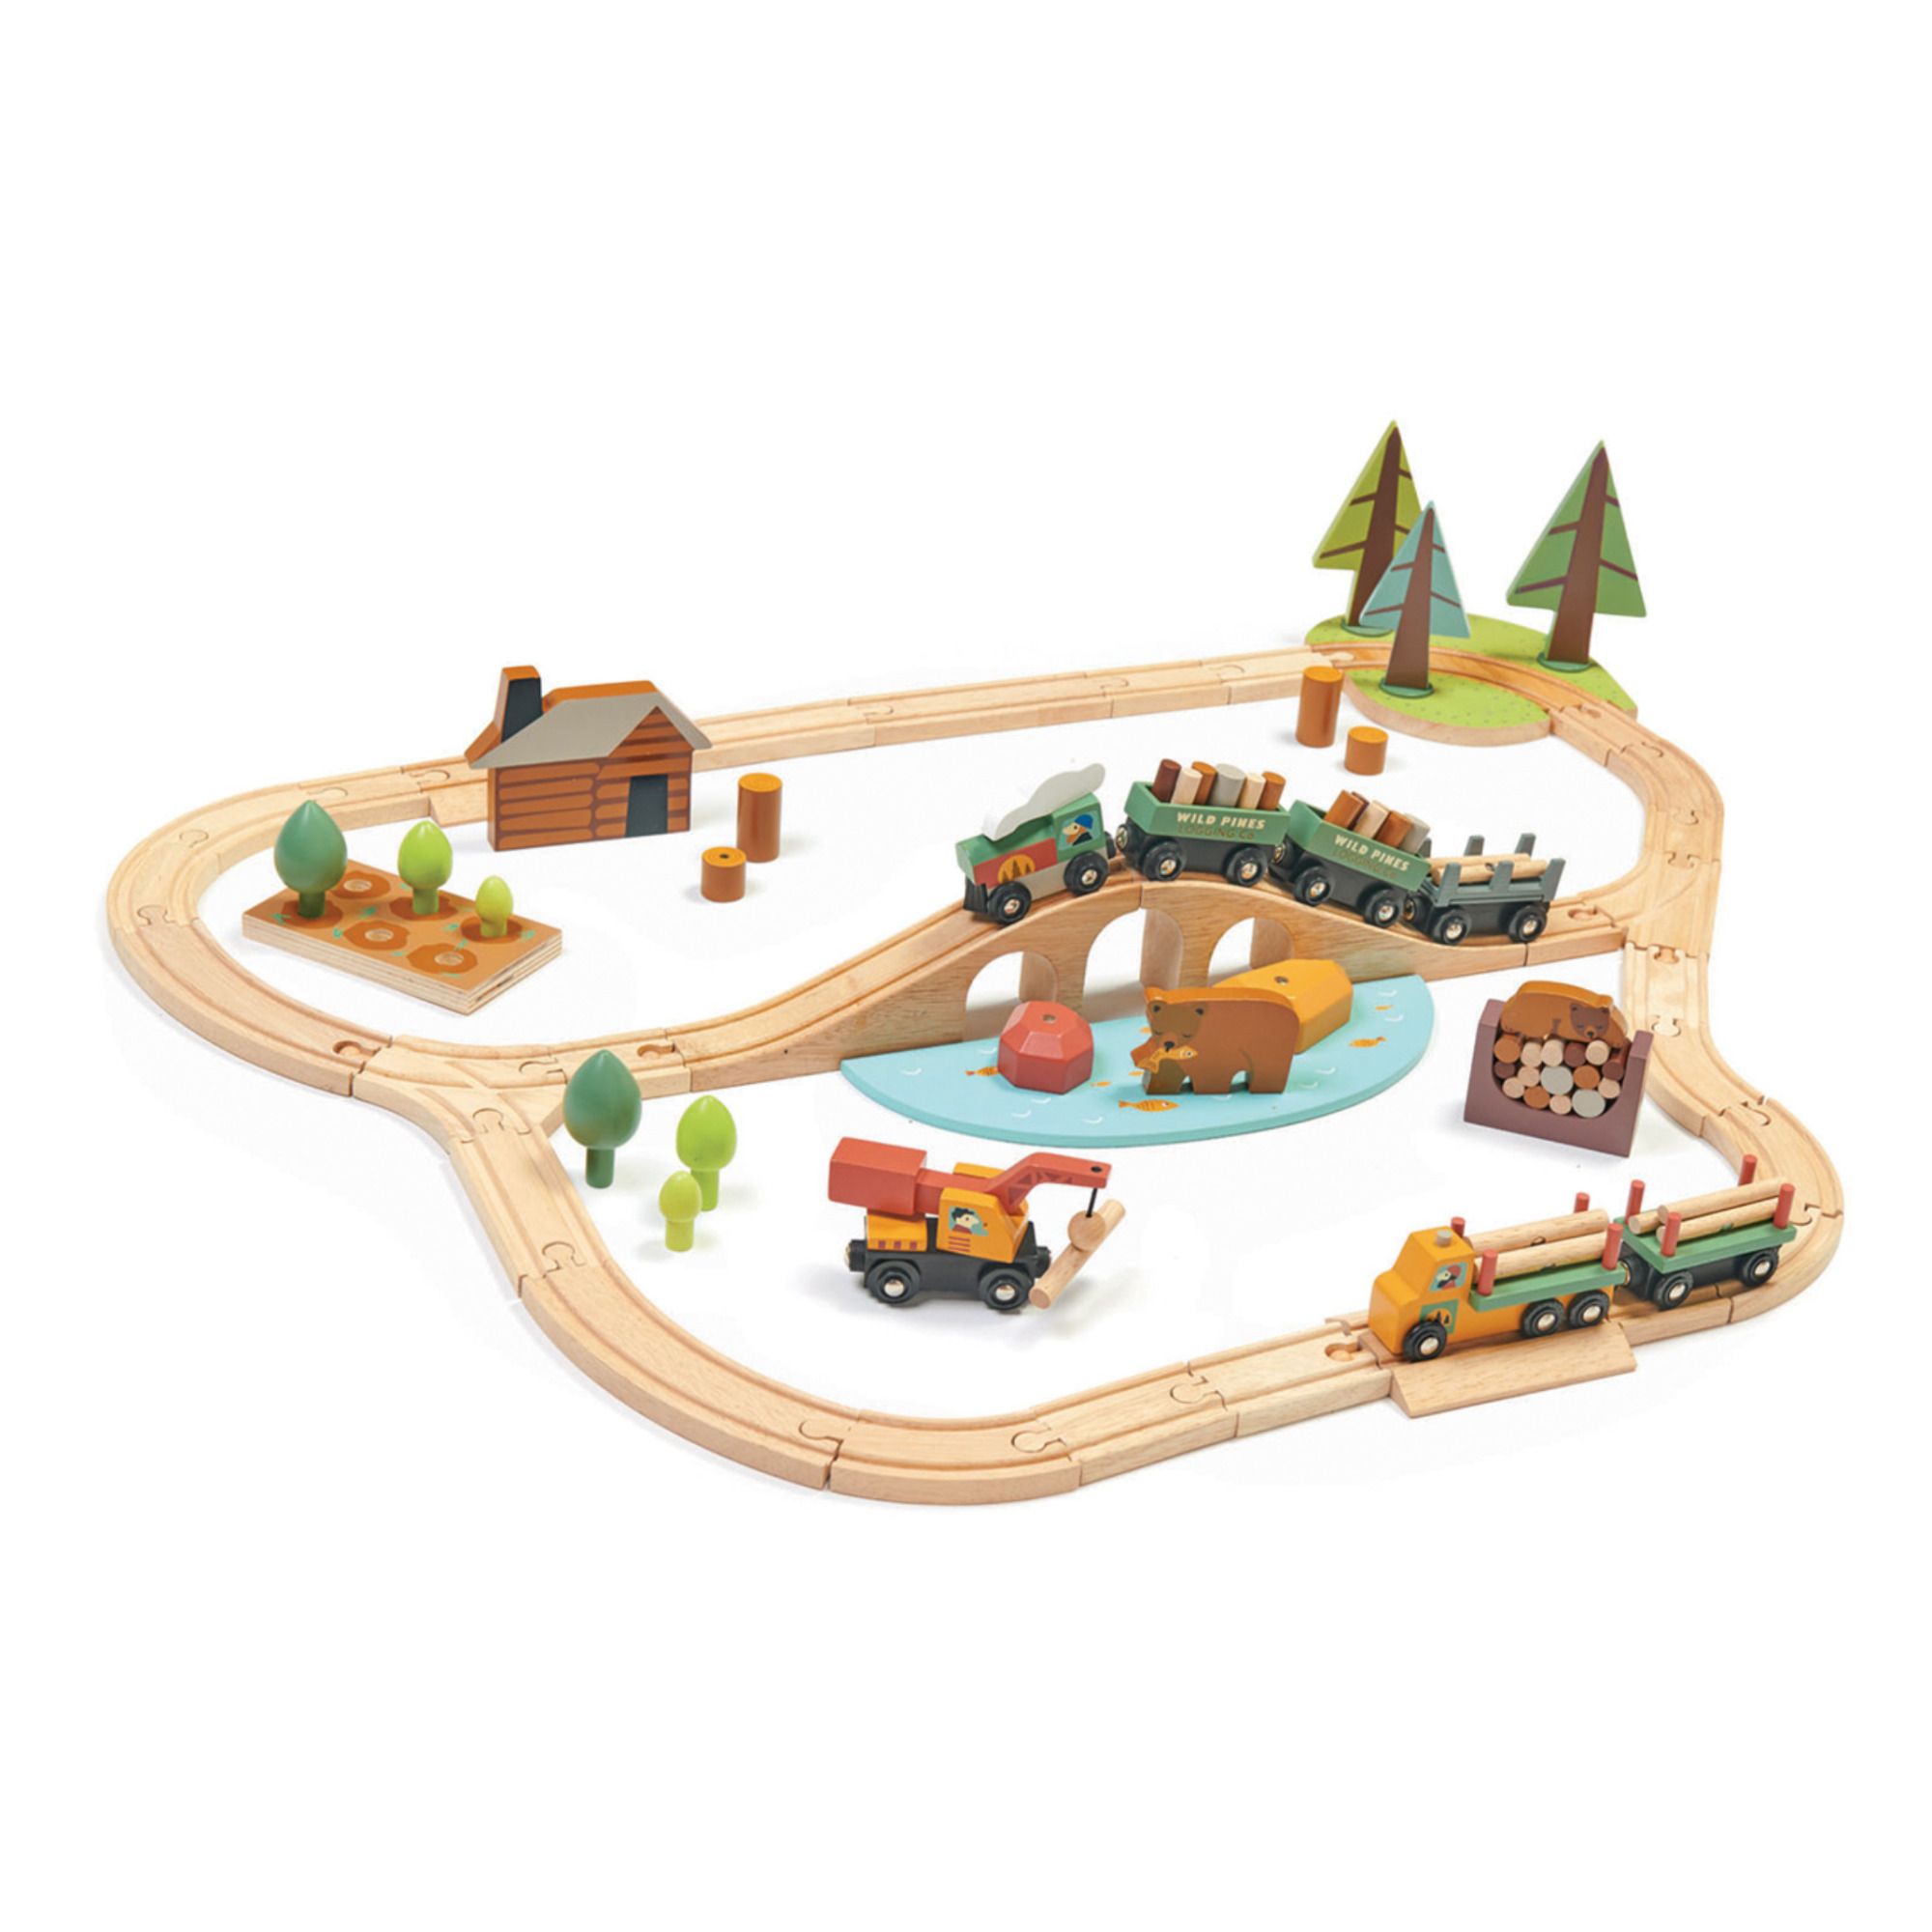 Wooden Logging Station Train Track Kids Toy Lumber Mill Playset Railway Toy 